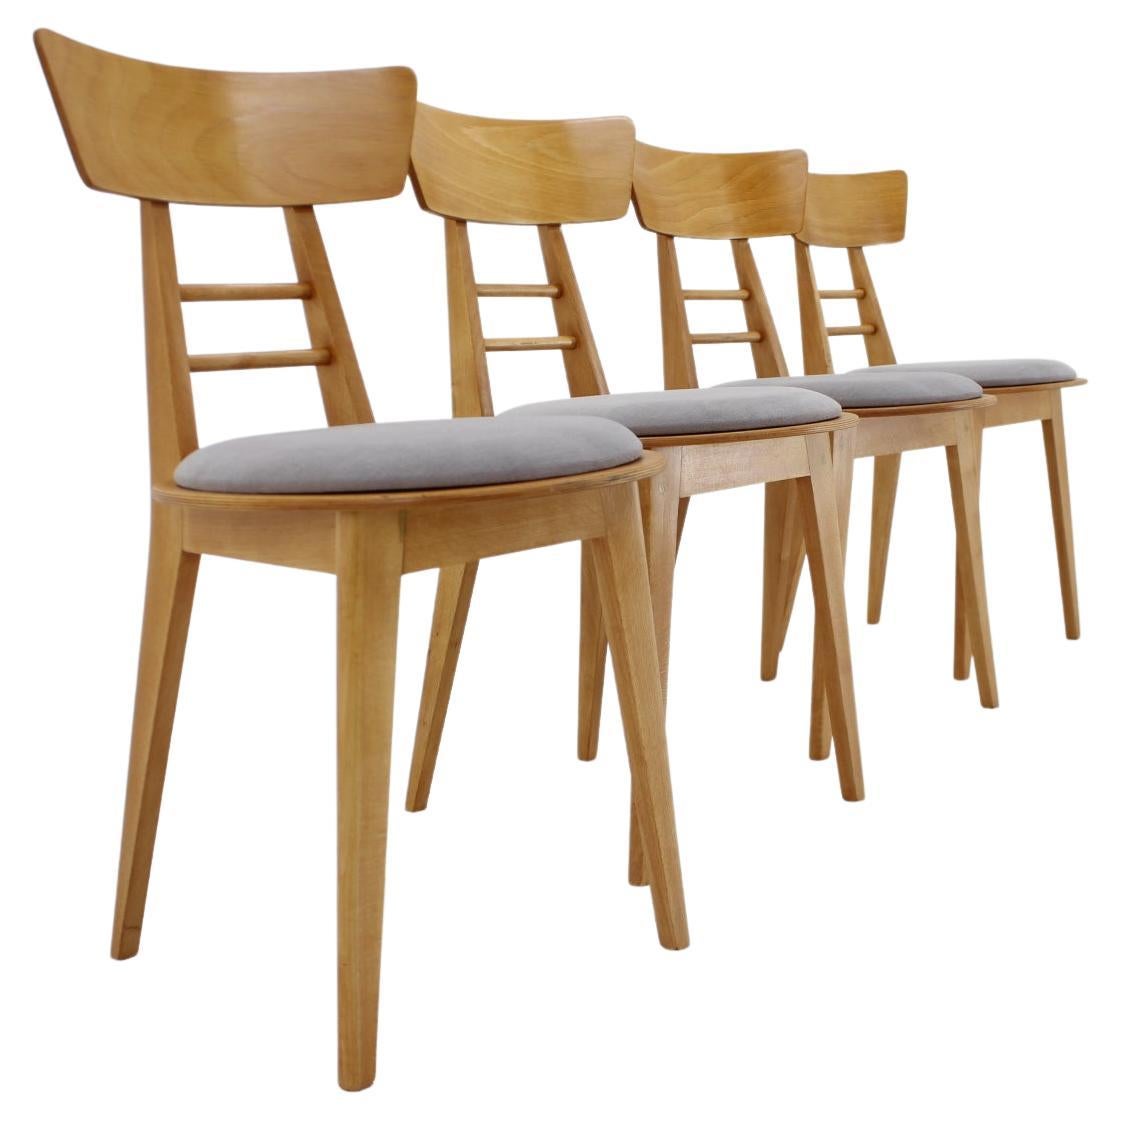 1980s Set of Four Dining Chairs by Ton, Czechoslovakia For Sale